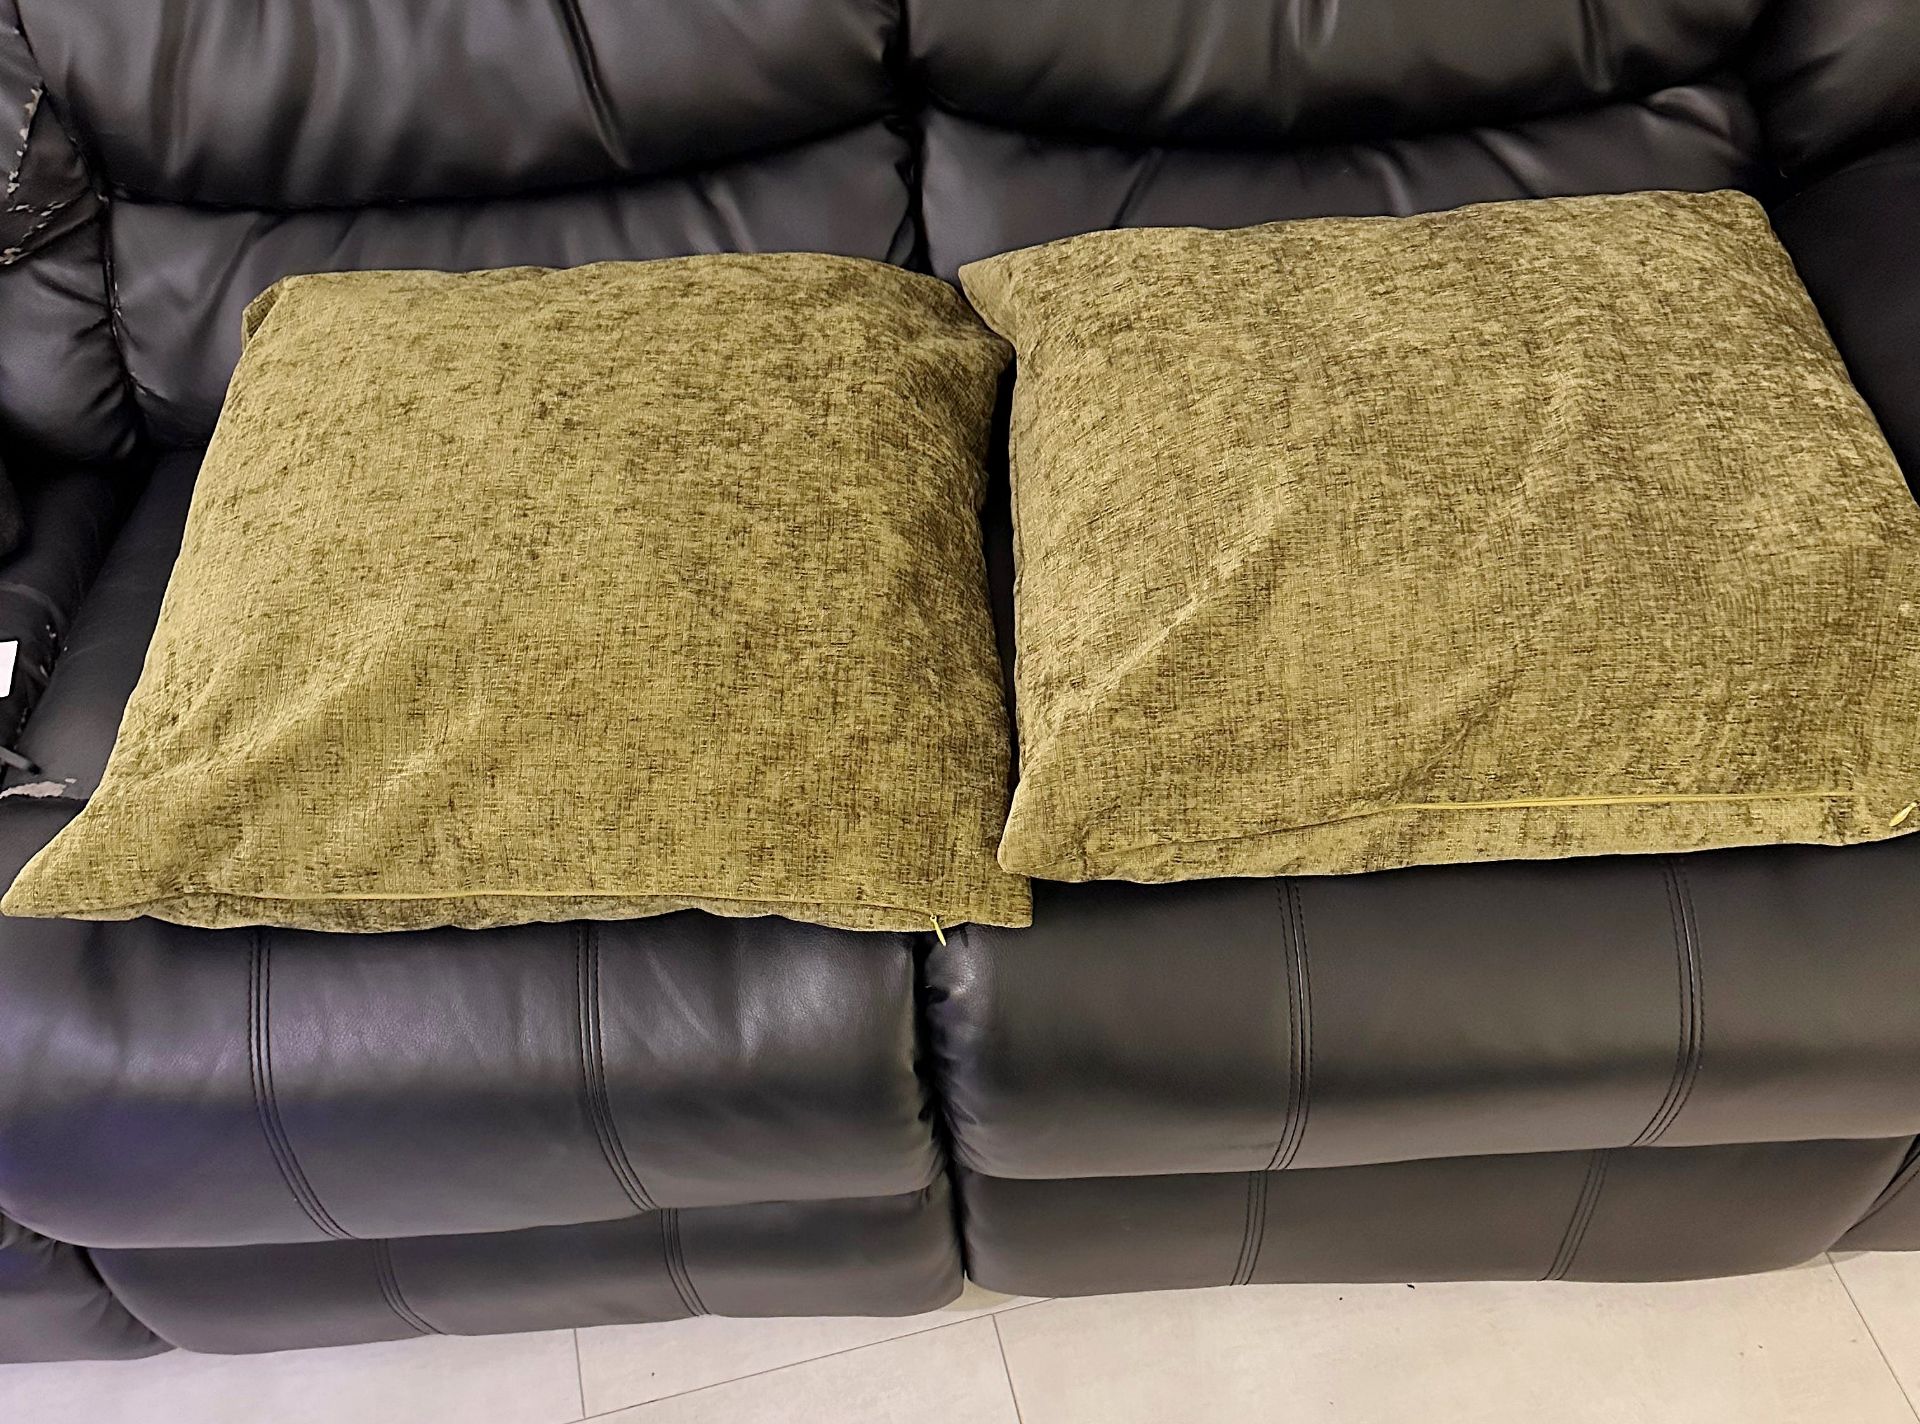 2 x Large Velvet Chenille Green Cushion With Cotton Inners And Zip Closing - Dimension 50x50cm - - Image 2 of 3